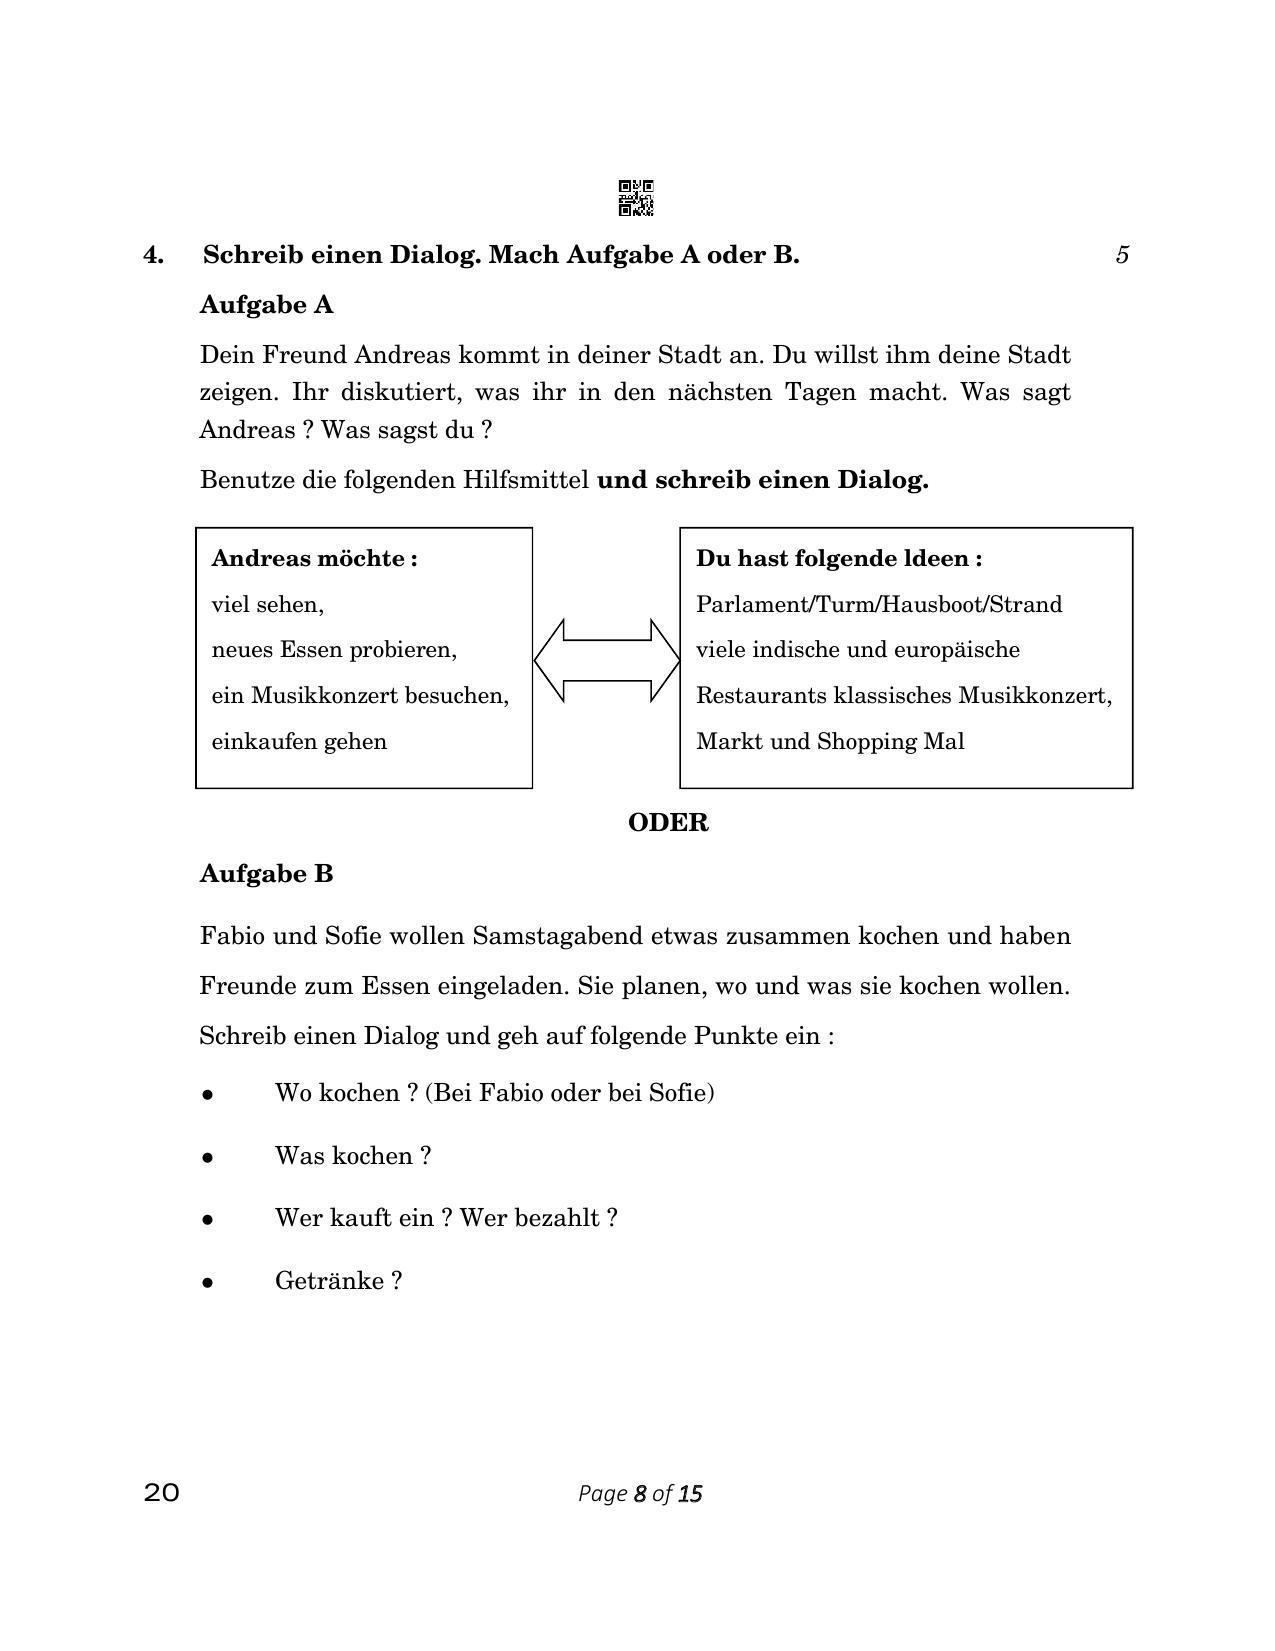 CBSE Class 12 20_German 2023 Question Paper - Page 8